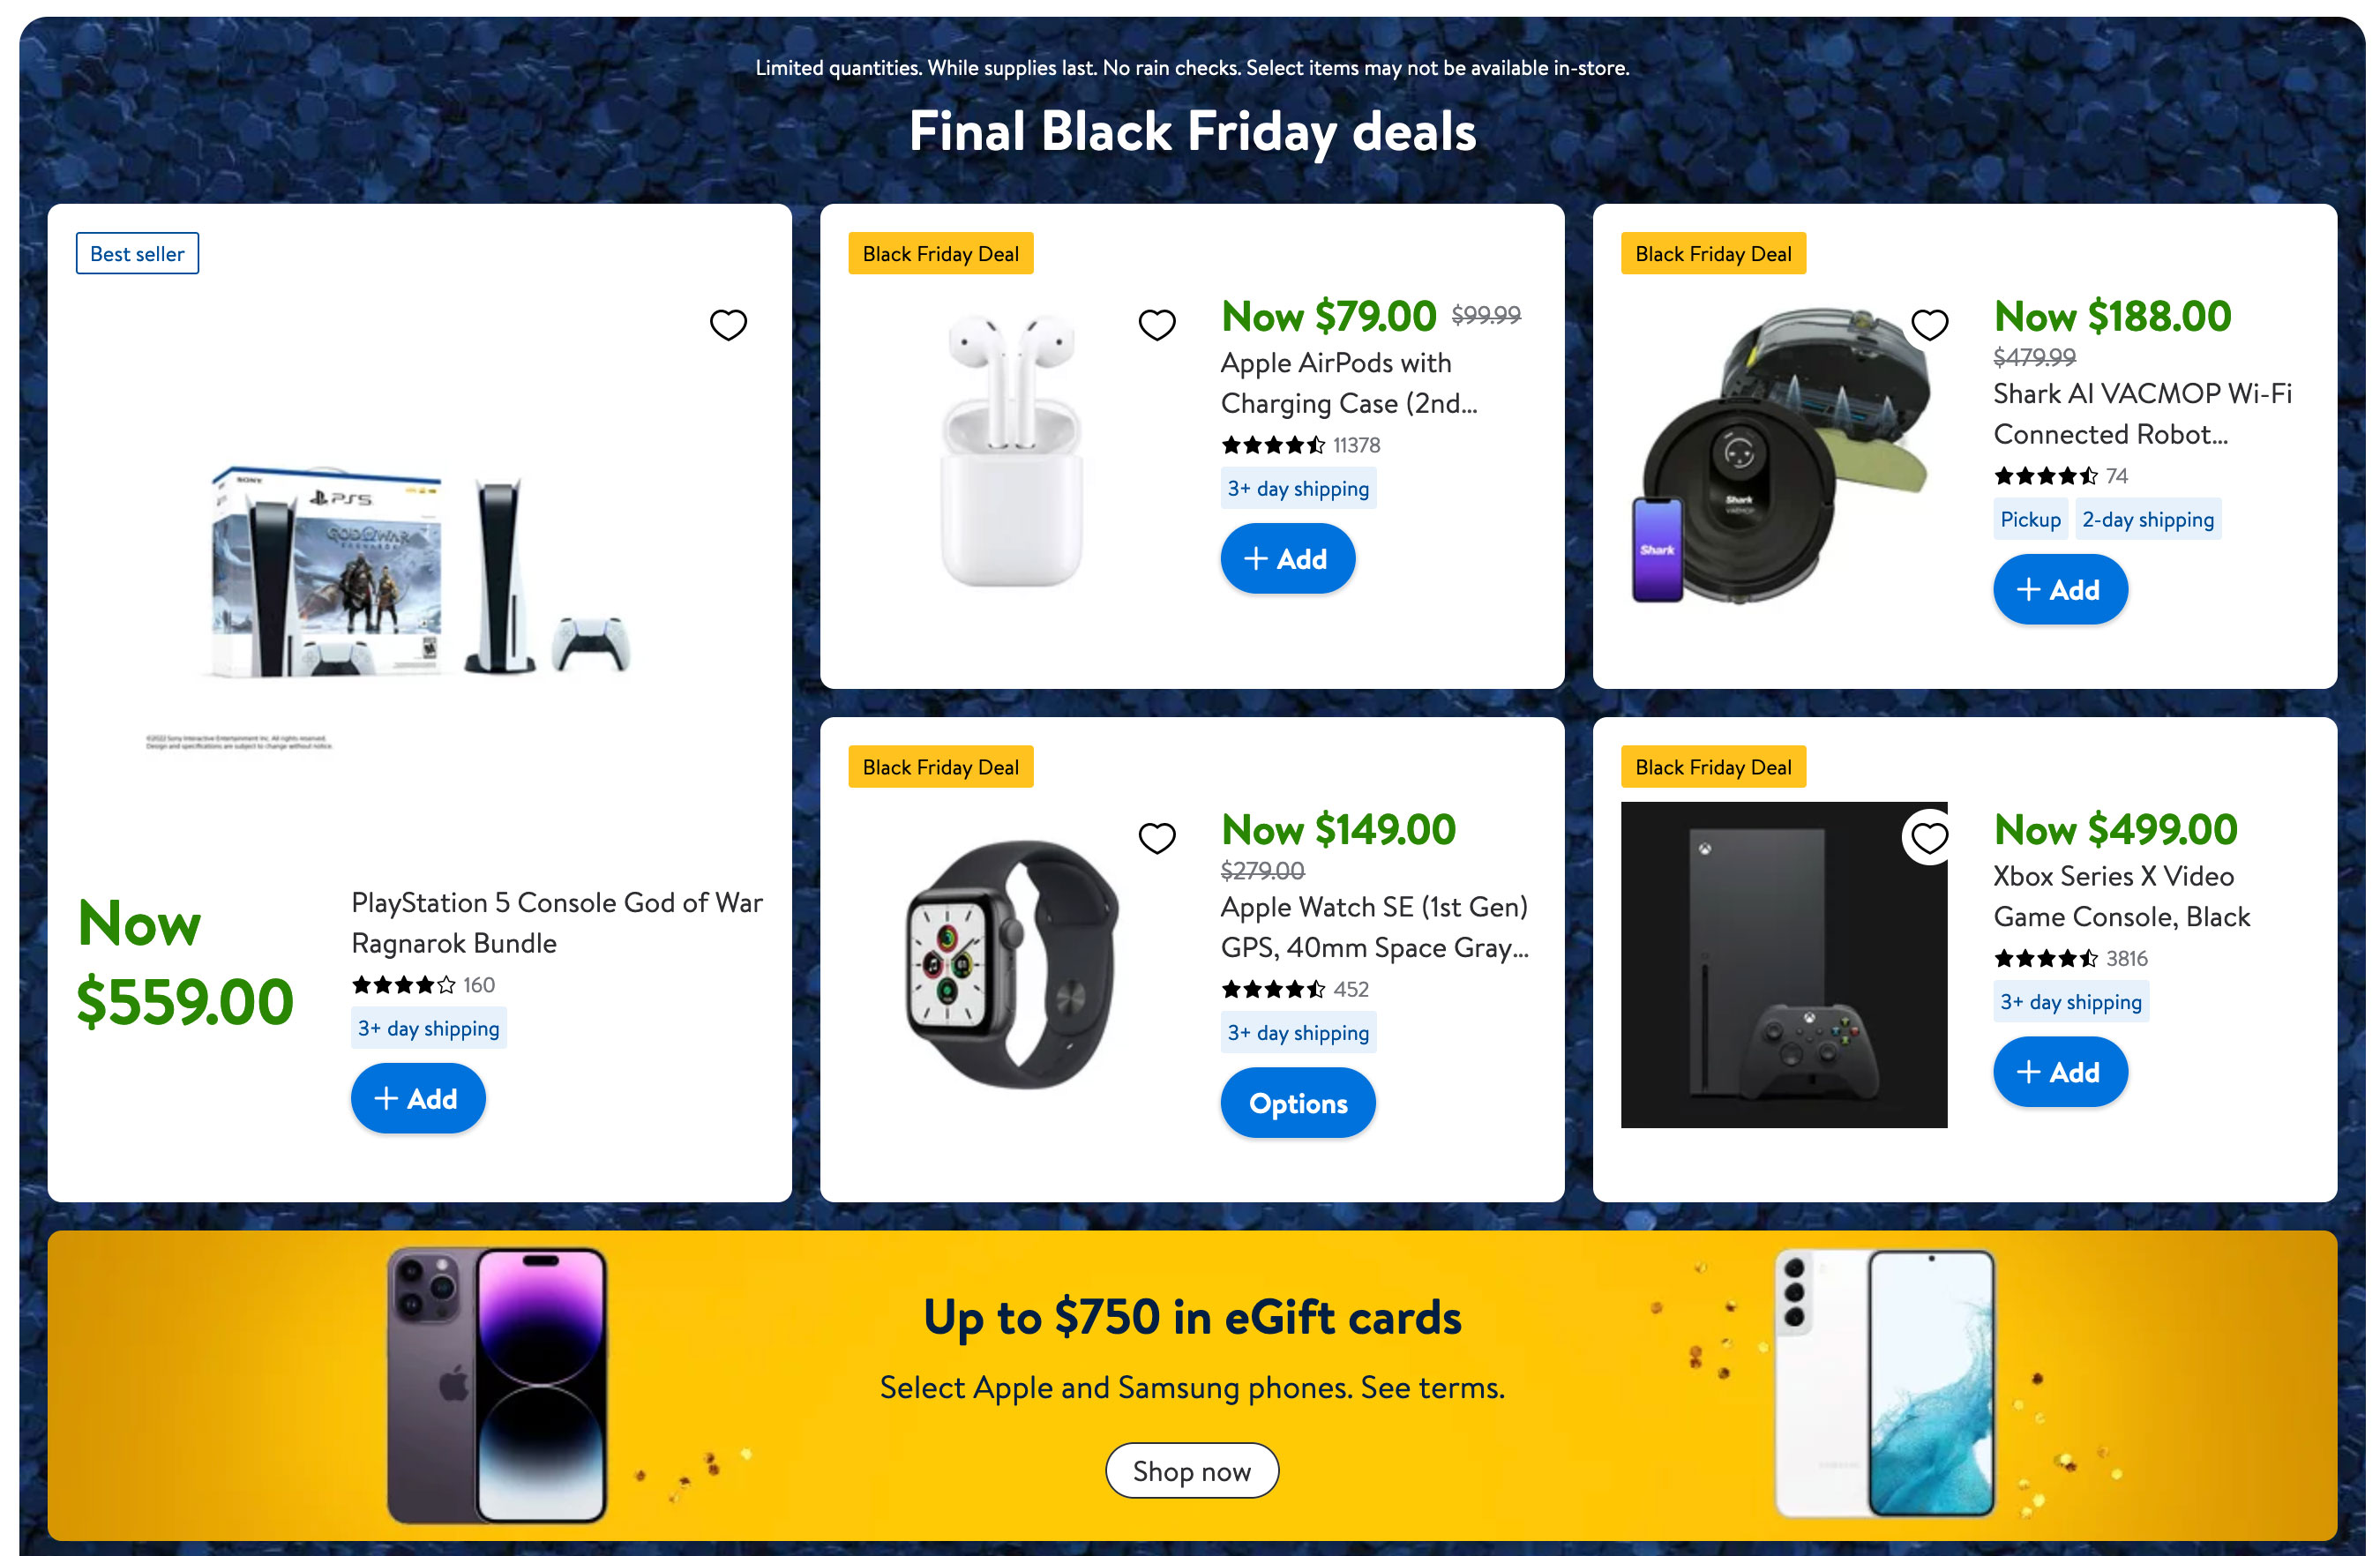 Walmart's Black Friday 2021 ad has leaked, and some items are